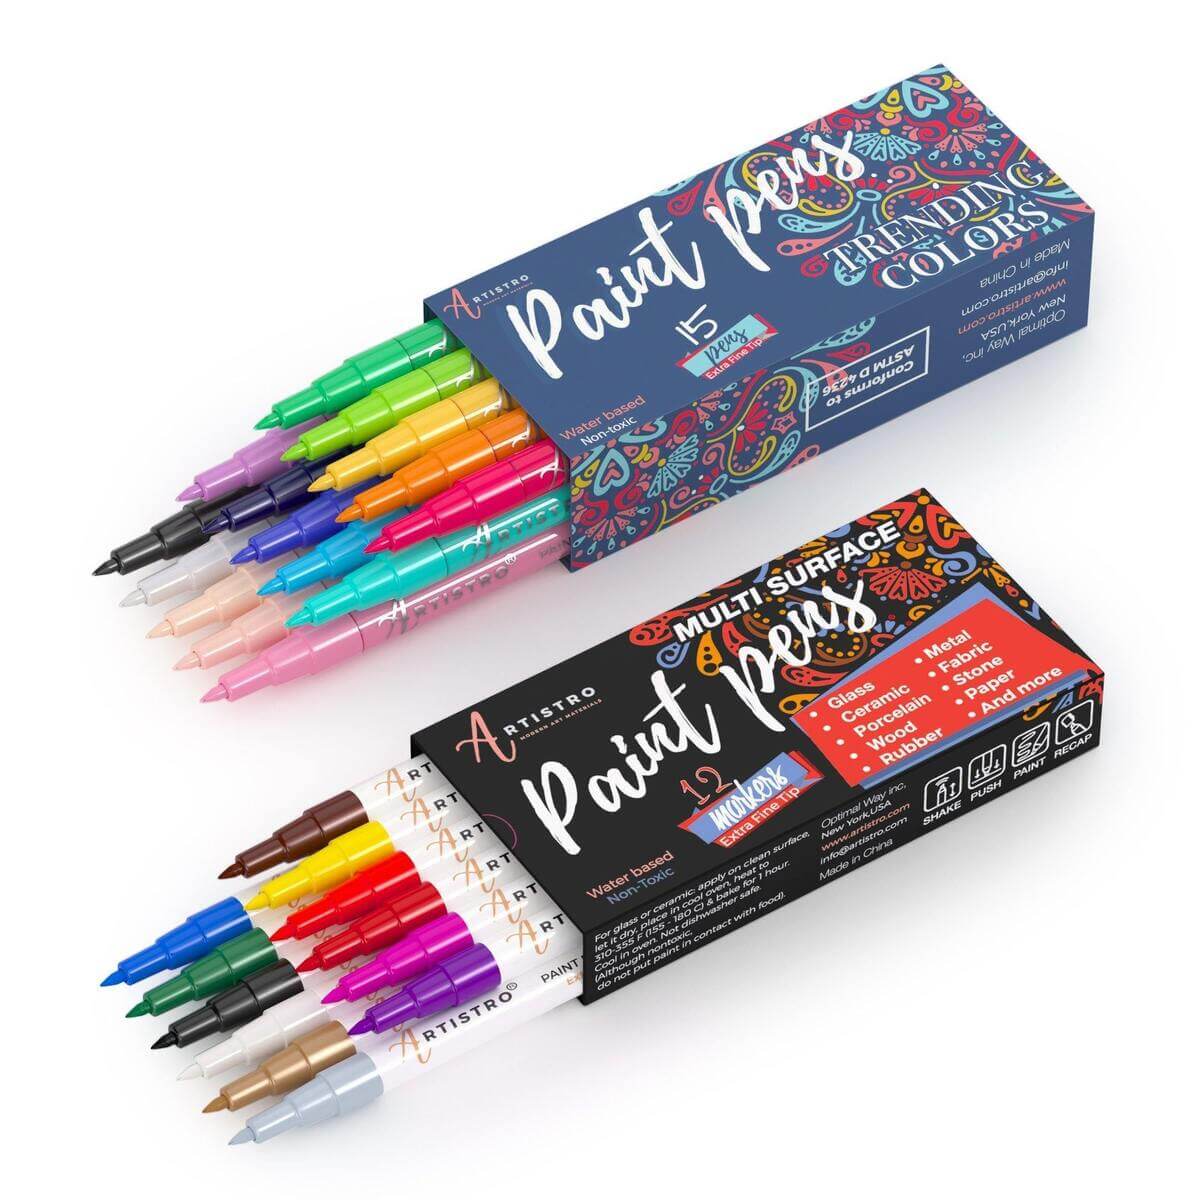 http://artistro.com/cdn/shop/products/27-artistro-acrylic-art-markers-12-extra-fine-tip-paint-pens-15-special-colors-paint-pens-for-rock-wood-glass-ceramic-painting-502378.jpg?v=1639064765